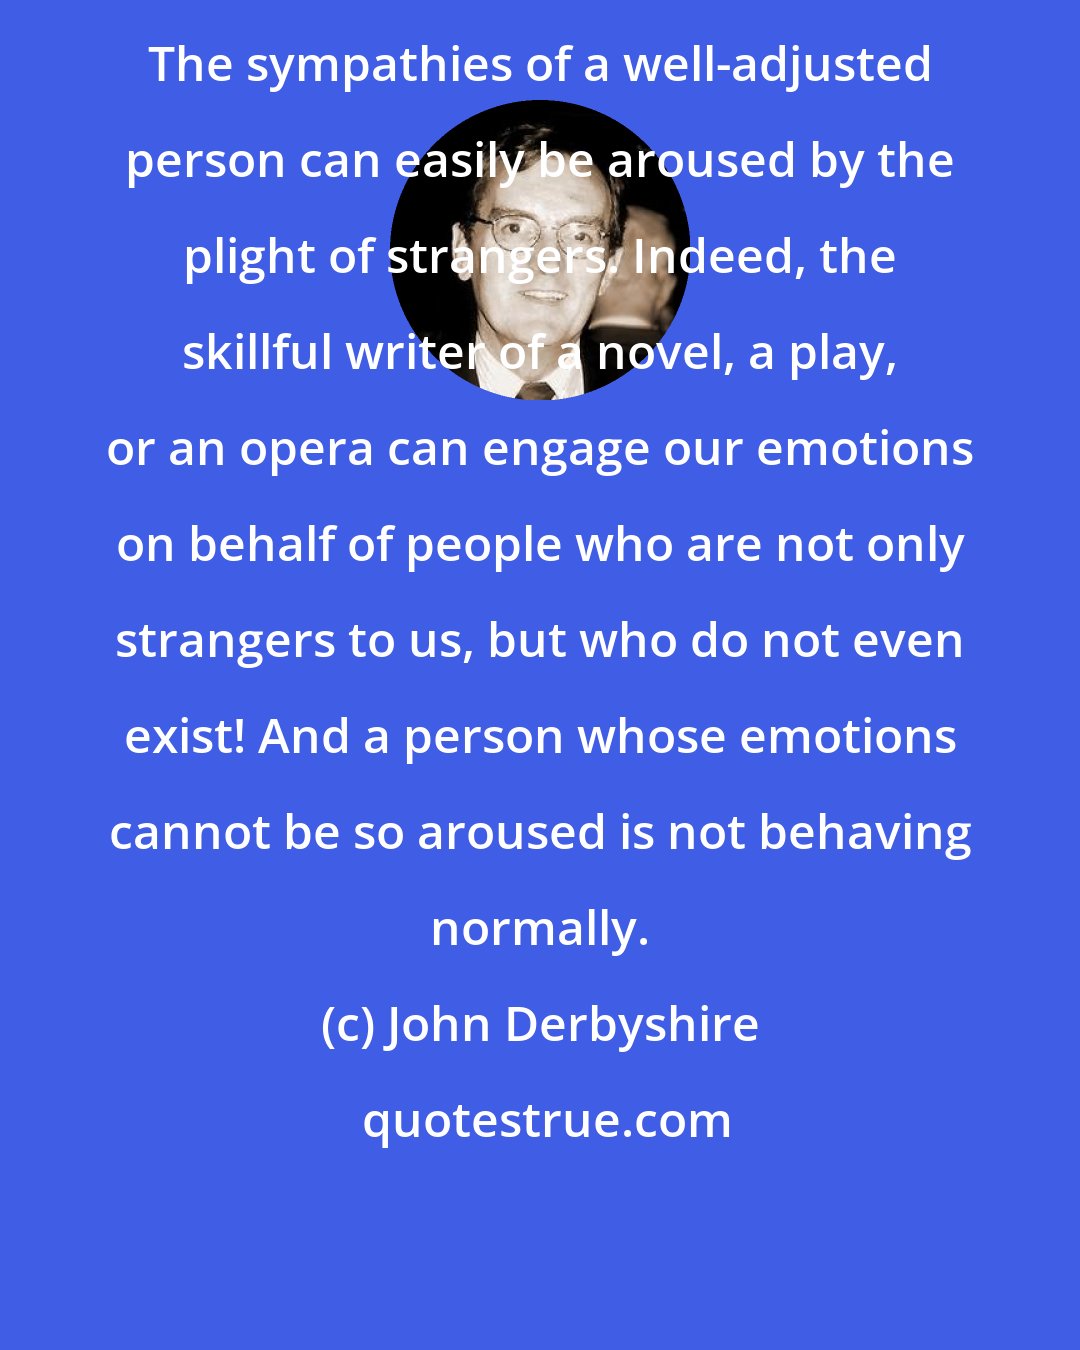 John Derbyshire: The sympathies of a well-adjusted person can easily be aroused by the plight of strangers. Indeed, the skillful writer of a novel, a play, or an opera can engage our emotions on behalf of people who are not only strangers to us, but who do not even exist! And a person whose emotions cannot be so aroused is not behaving normally.